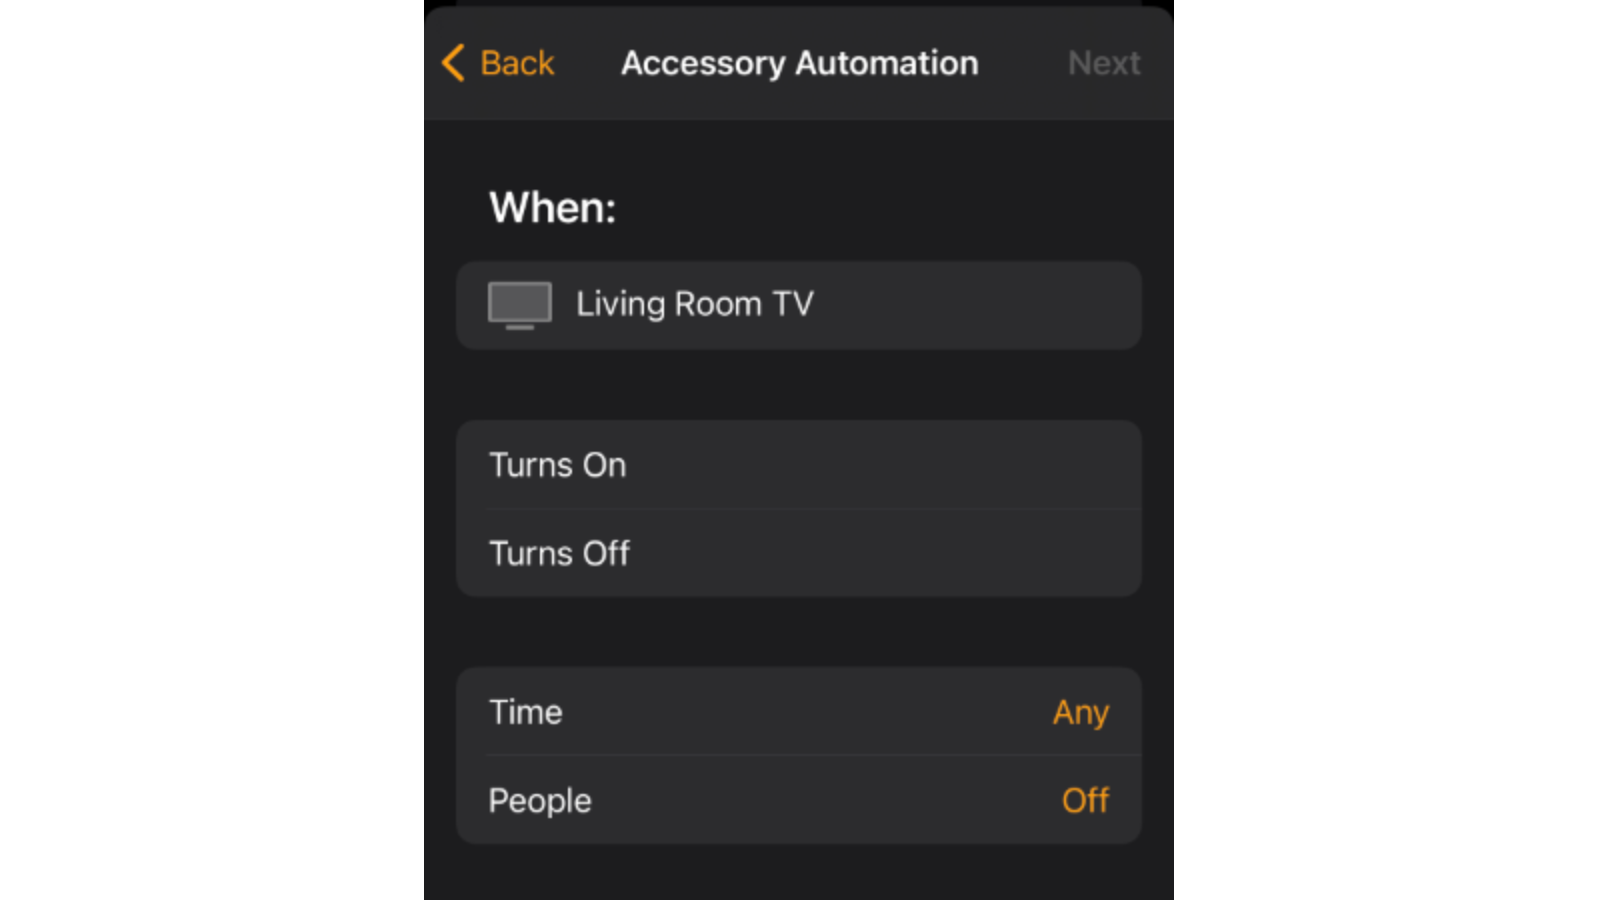 Setting up a TV automation in the Home app